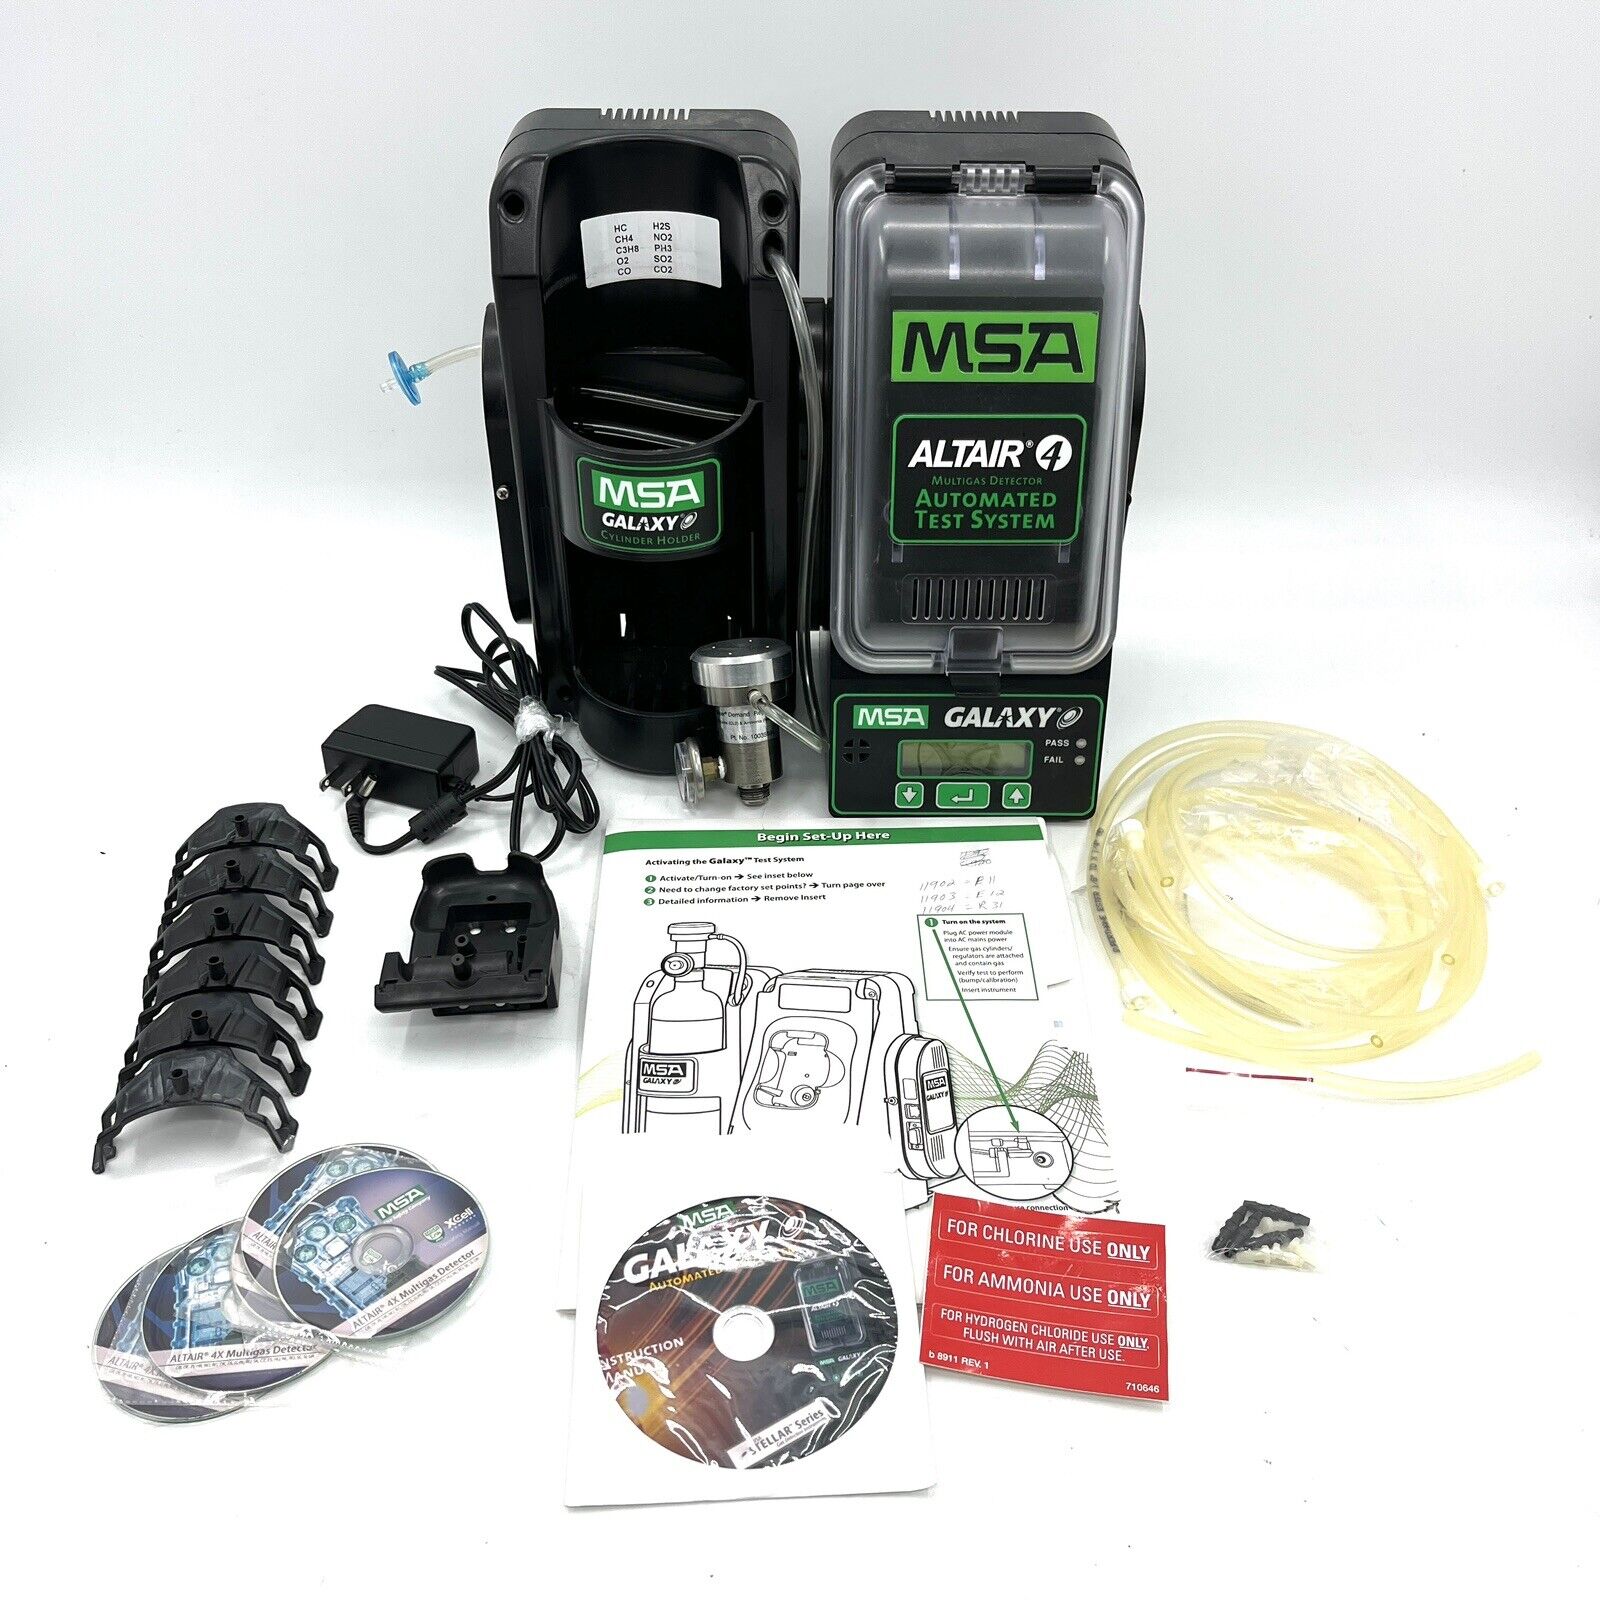 MSA Galaxy Altair 4 MultiGas Detector Automated Test System w/ Gas Meter & Acces